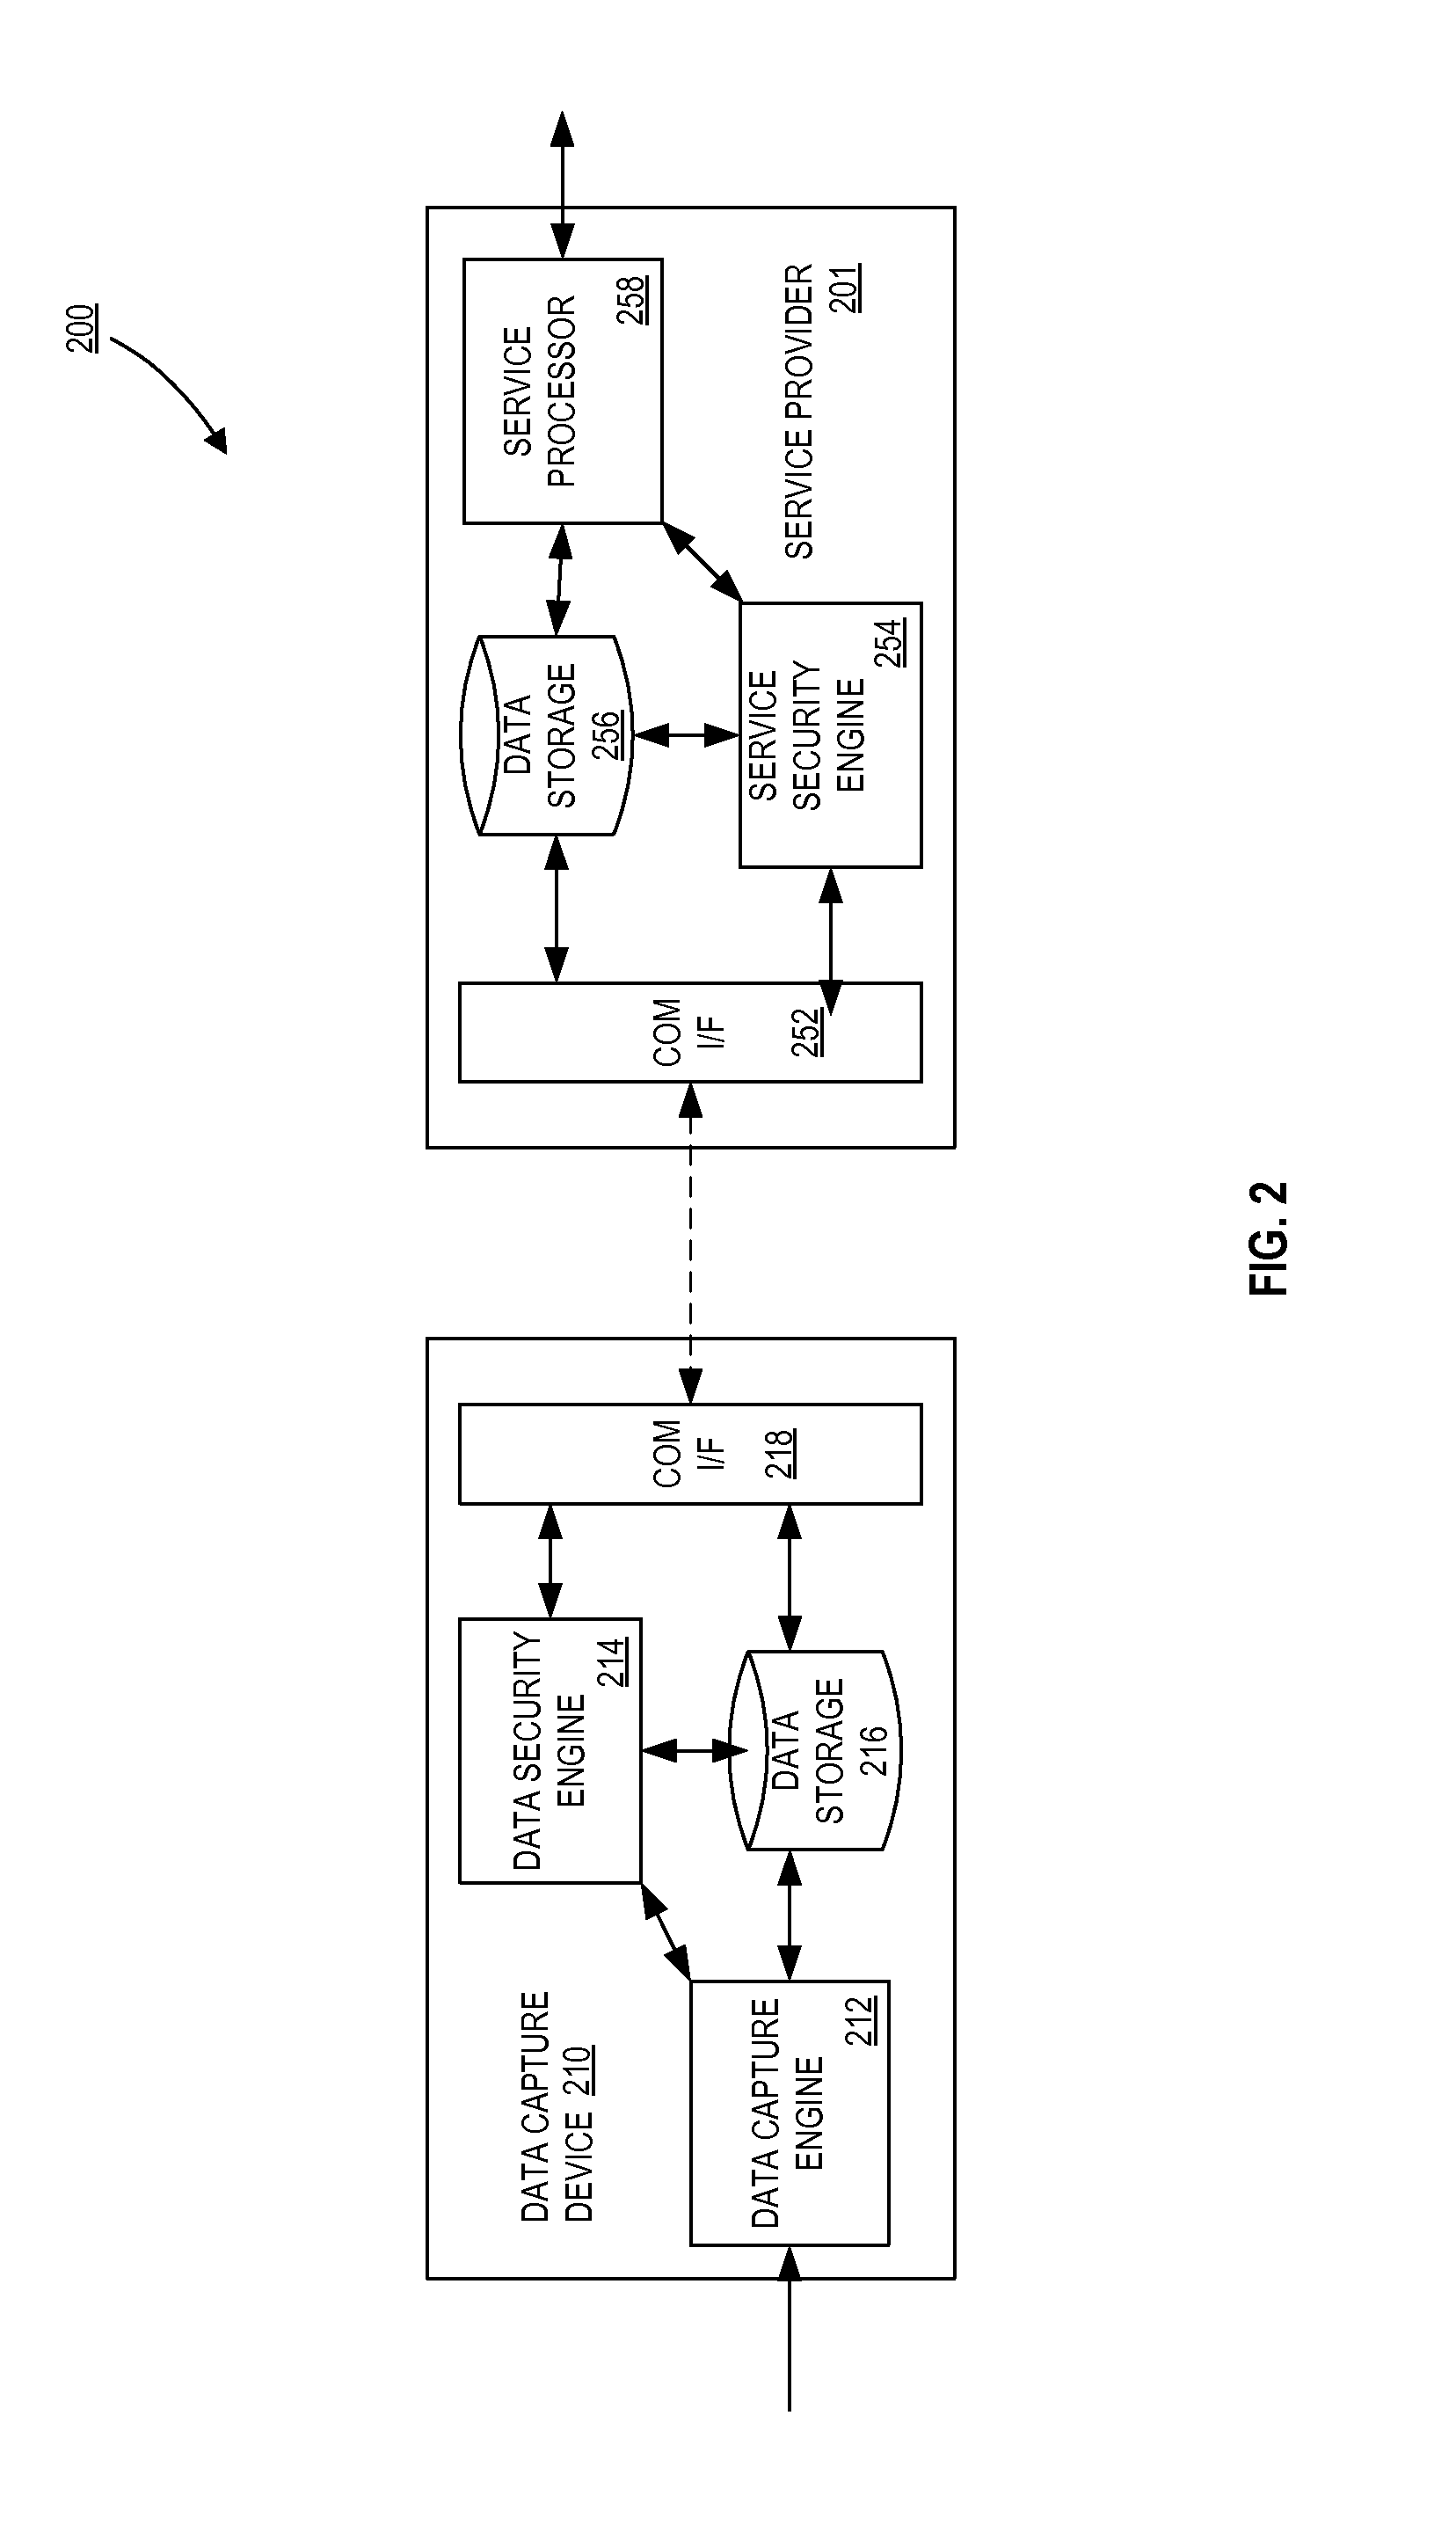 Method and apparatus for trust based data scanning, capture, and transfer